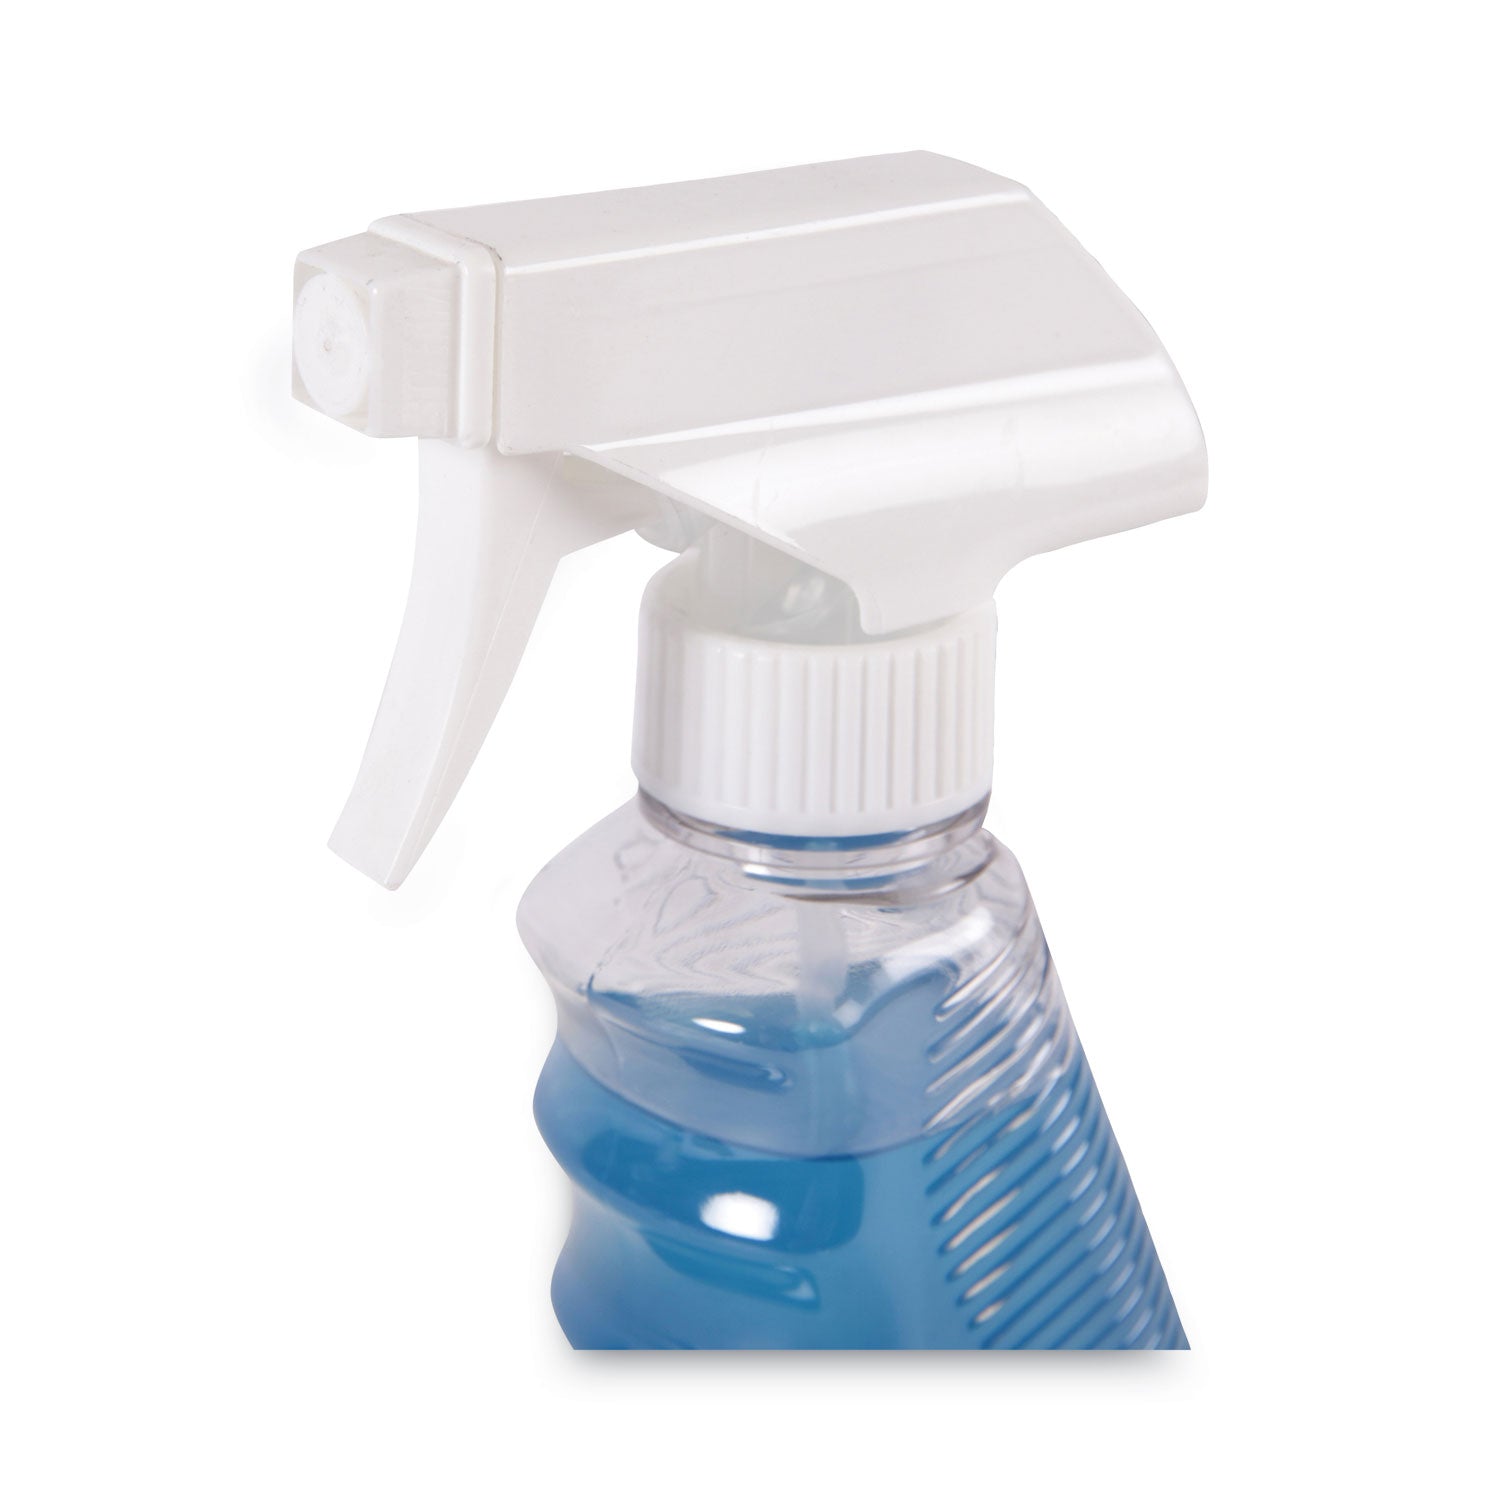 industrial-strength-glass-cleaner-with-ammonia-32-oz-trigger-spray-bottle_bwk47112aea - 4